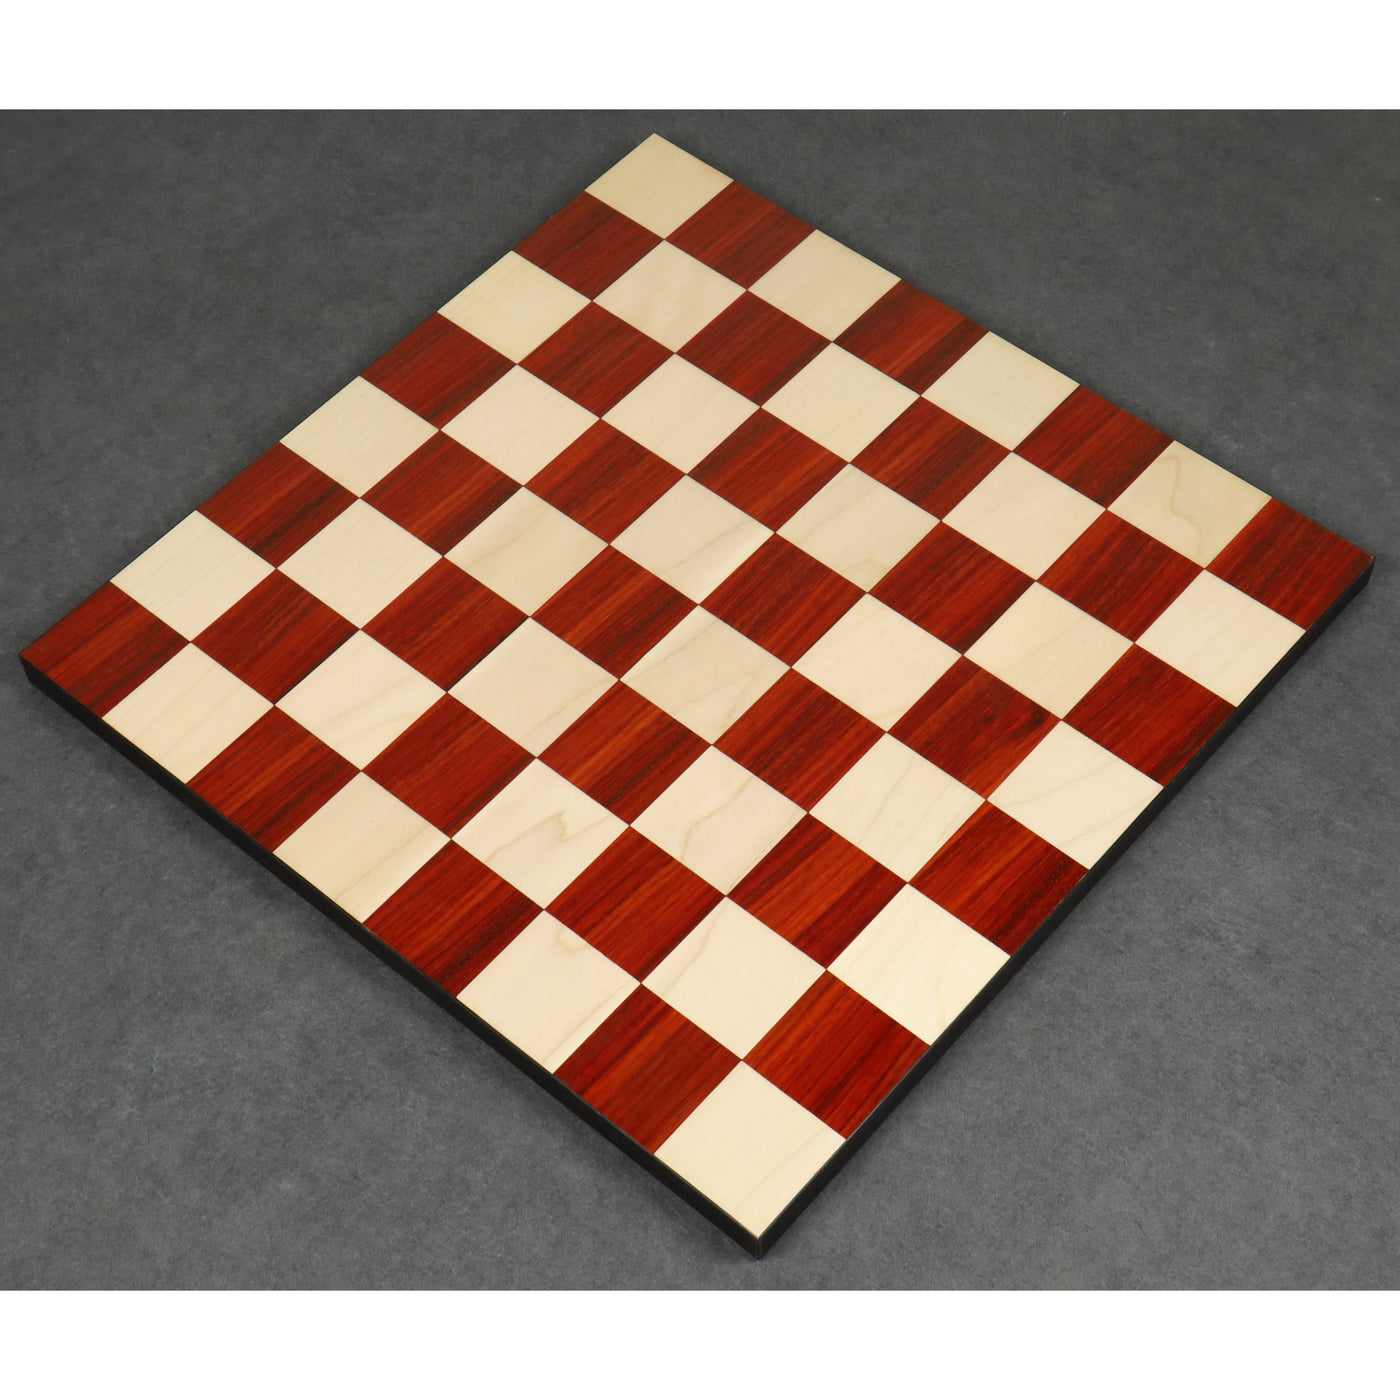 Combo of 4" Sleek Staunton Luxury Chess Set - Pieces in Bud Rose Wood with Board and Box